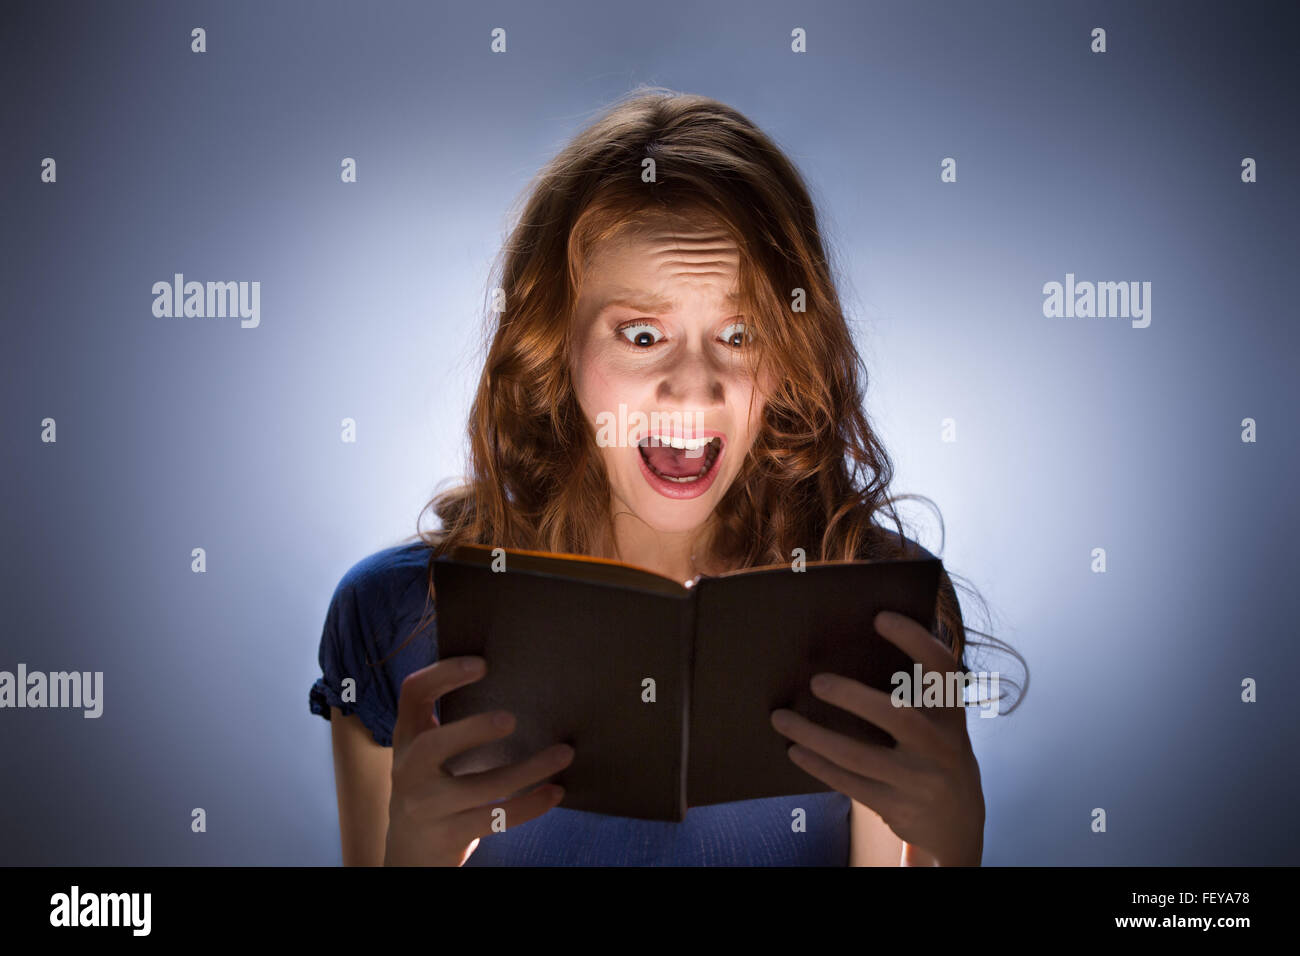 Concept shot of woman reading horror book and screaming Stock Photo